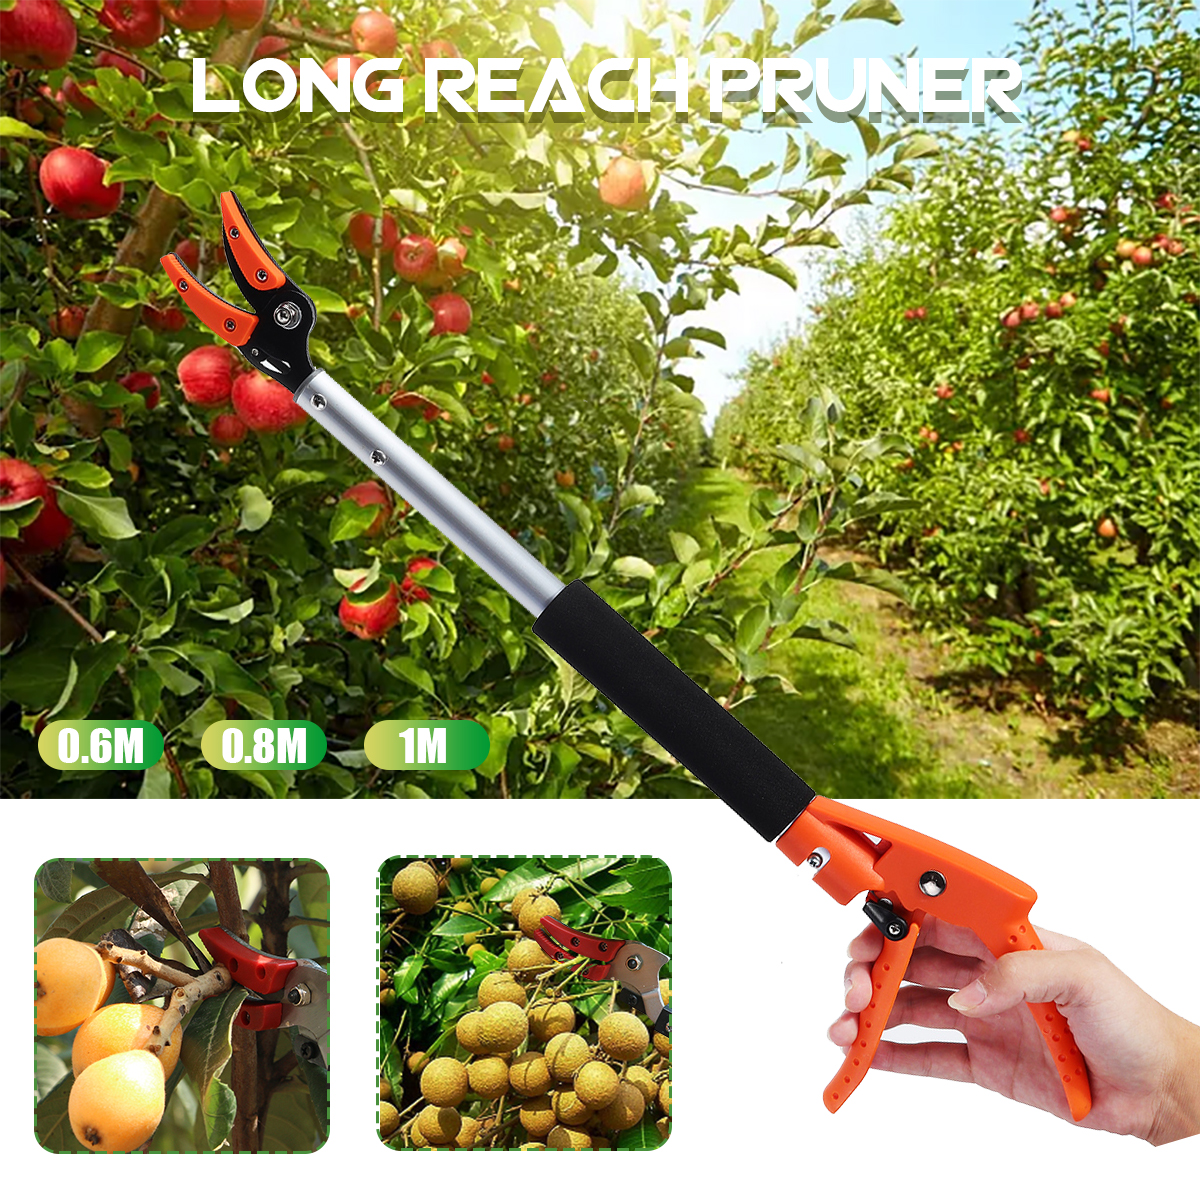 0.6-1M Extra Long Pruning and Hold Bypass Pruner Max Cutting 1/2 inch Fruit Picker Tree Cutter Garden Supplies